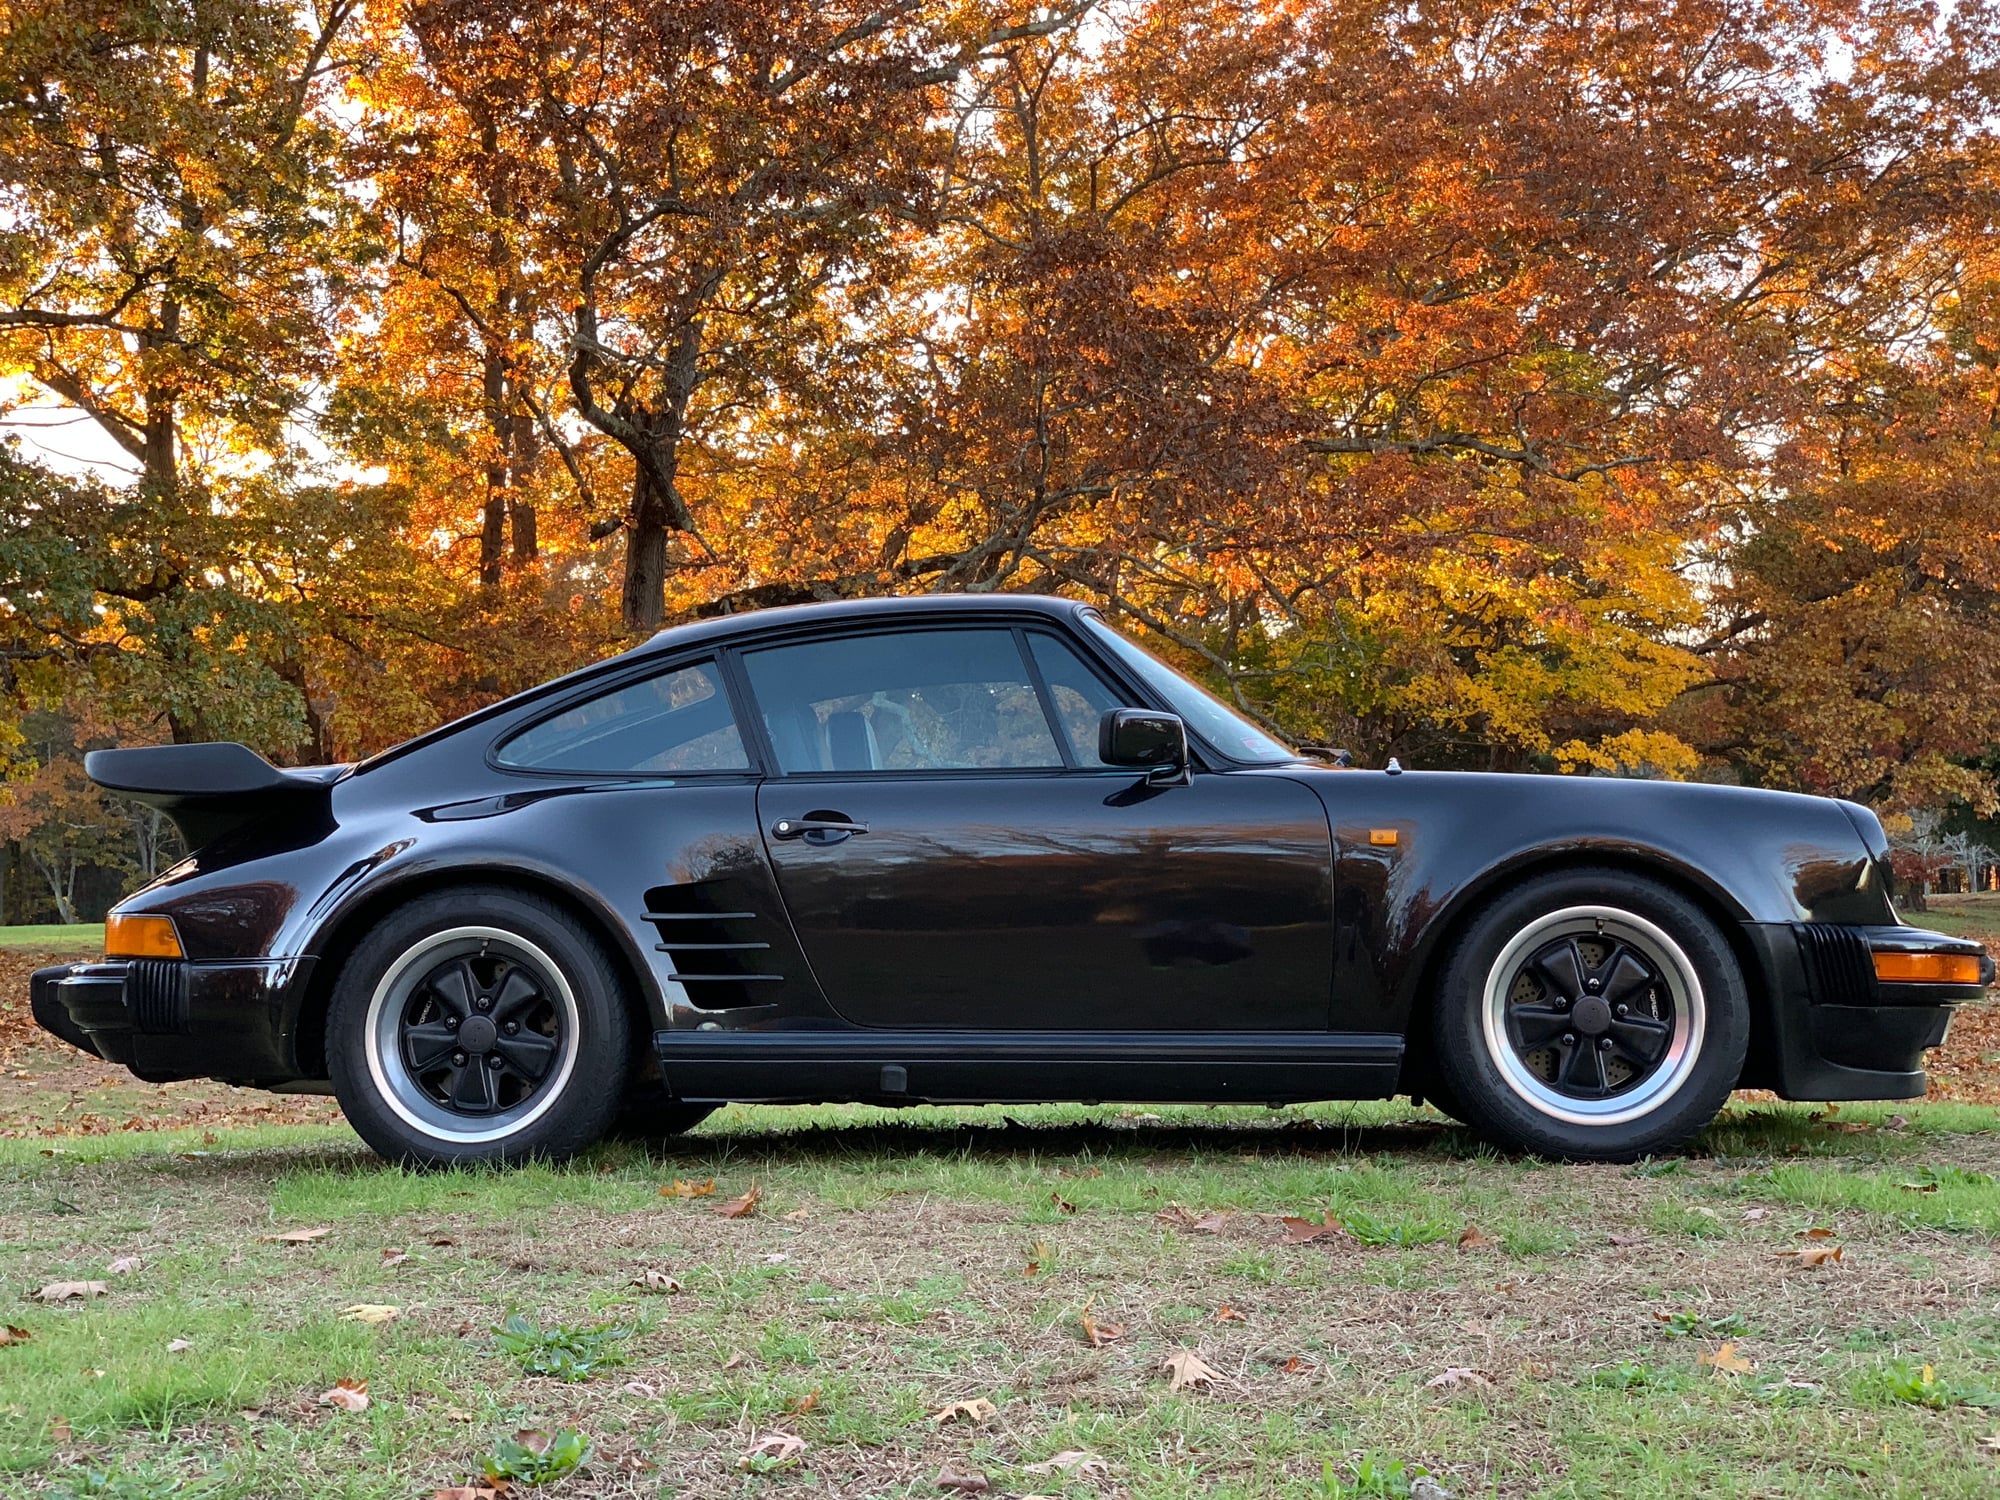 1984 Porsche 911 - 1984 Porsche 911 Turbo Indigo Black - Used - VIN WP000000000000000 - 53,226 Miles - 6 cyl - 2WD - Manual - Coupe - Other - East Greenwich, RI 02818, United States